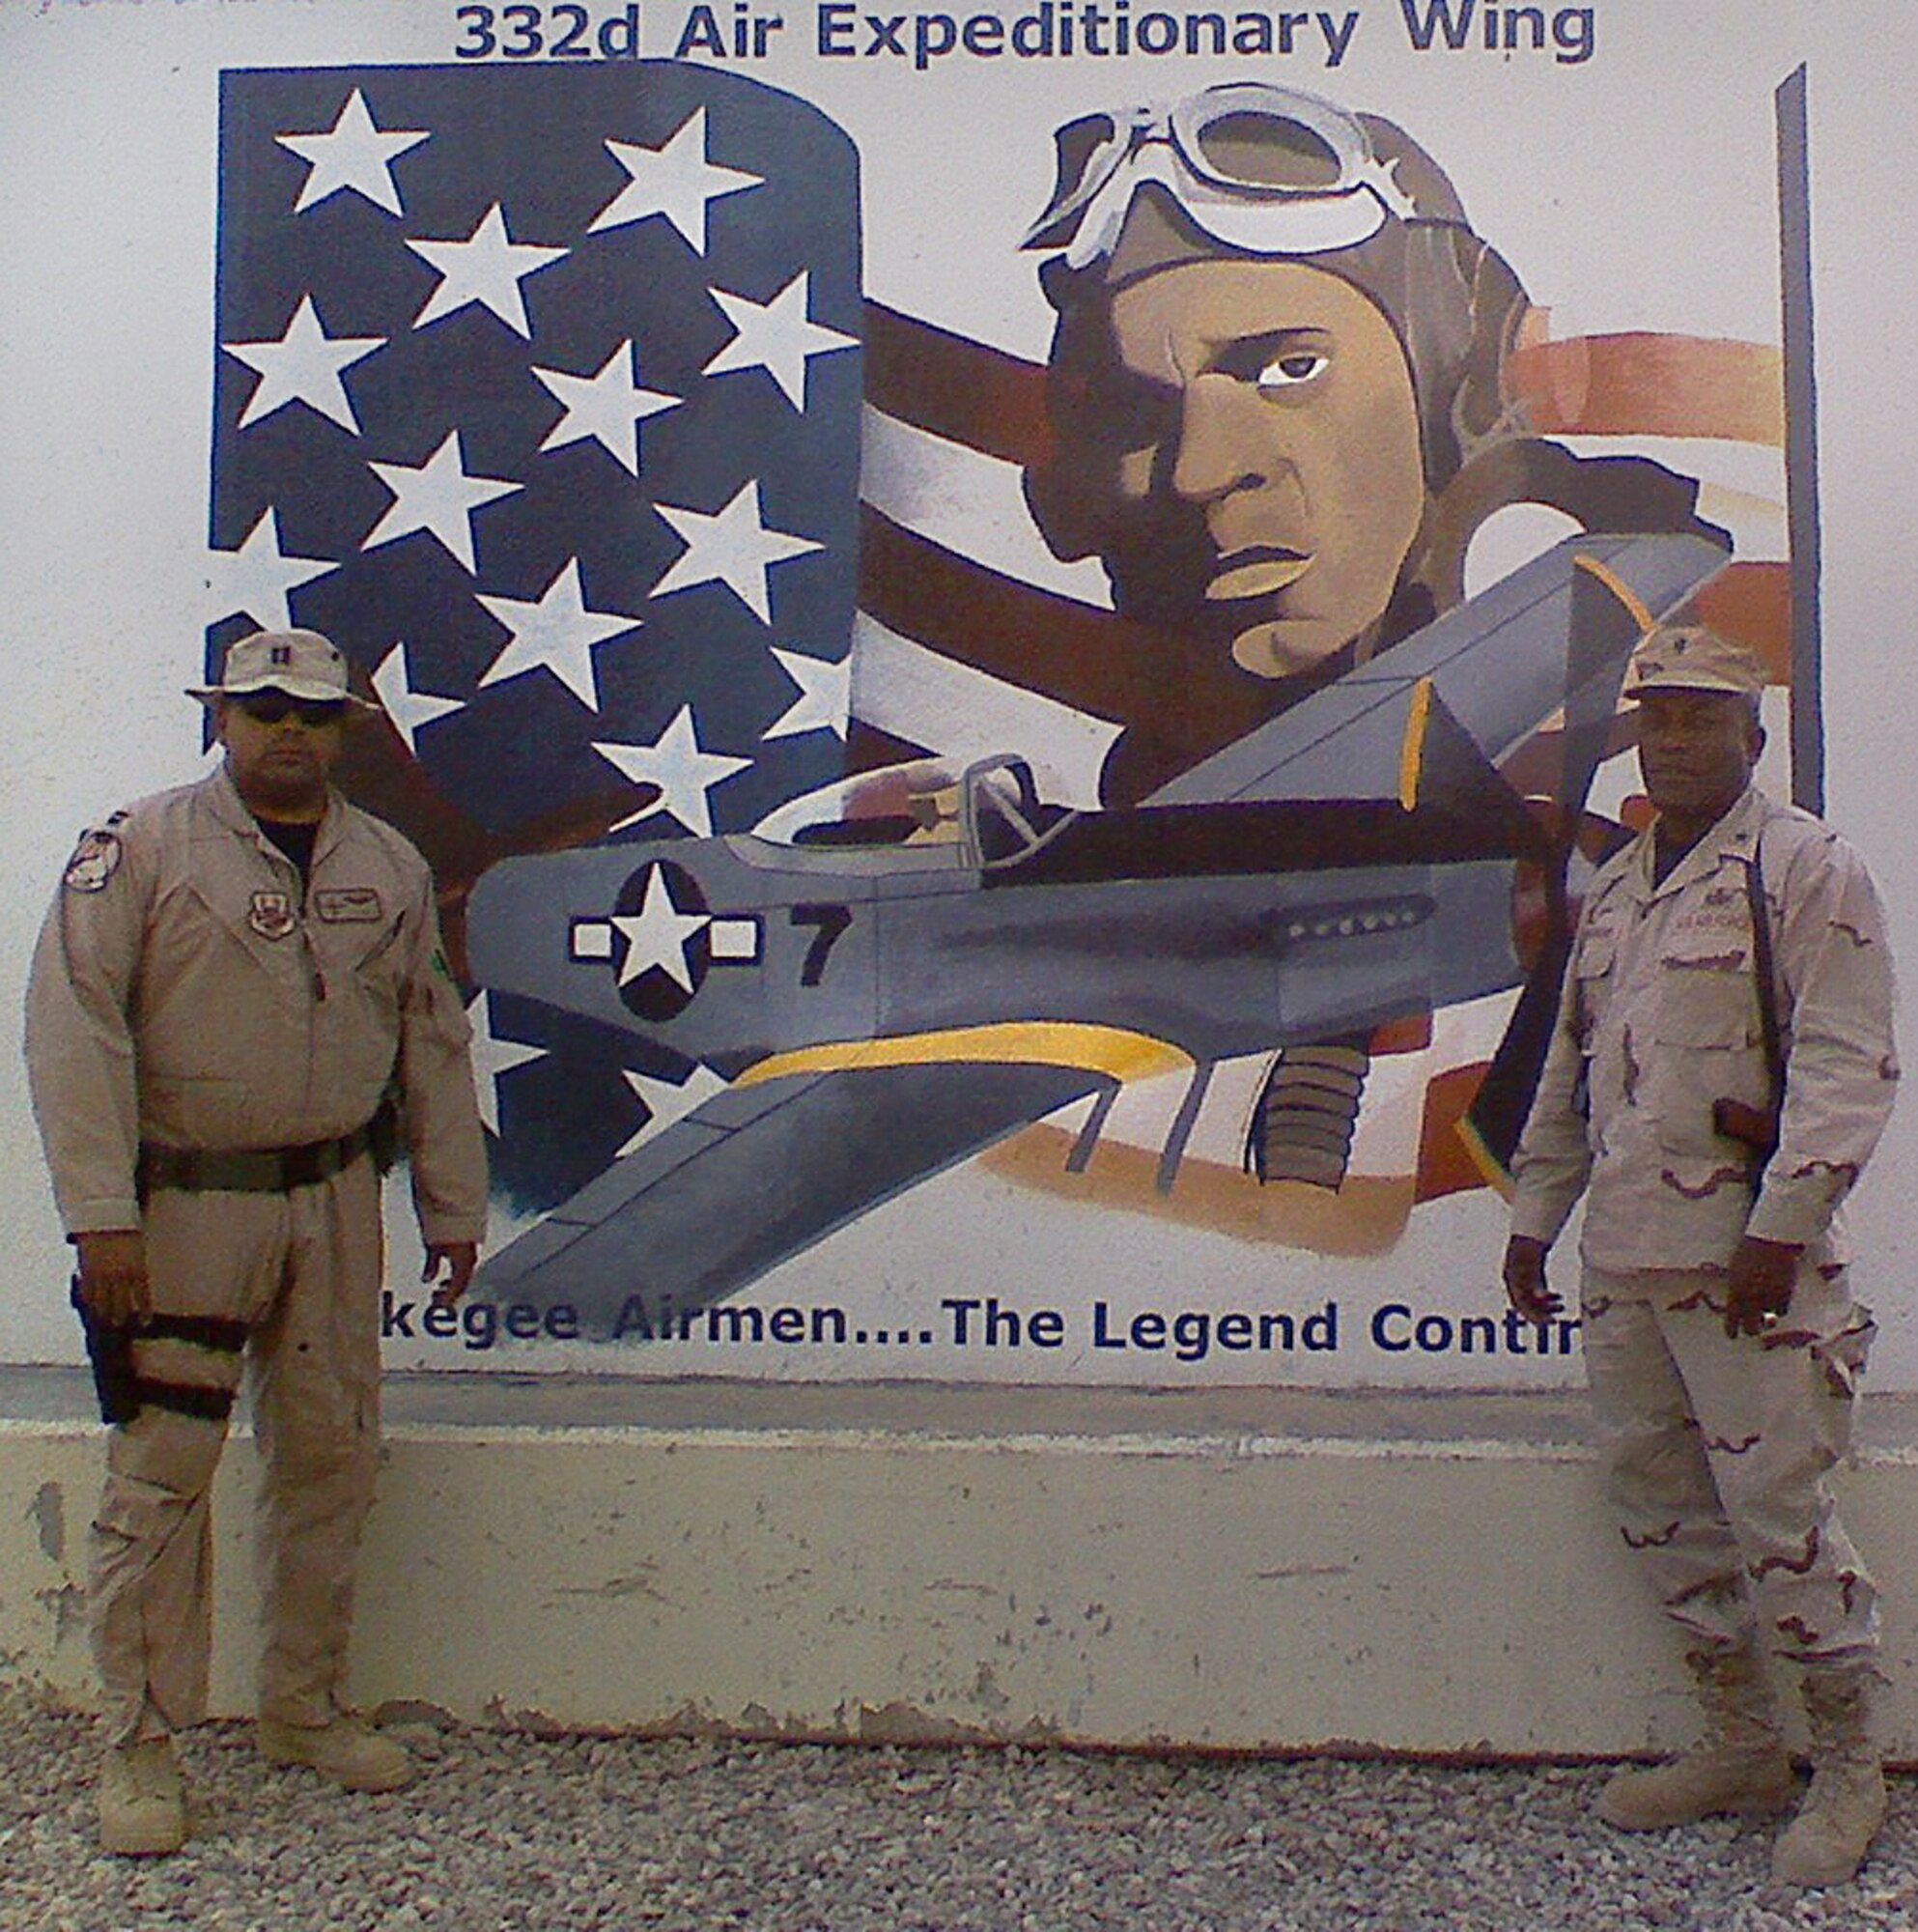 Then Capt. Ronnie, now Lt. Col., with the 432nd Wing/432nd Air Expeditionary Wing, left, and his father, then Brig. Gen. Ronnie, now retired Lt. Gen., right, stand in front of the 332nd Air Expeditionary Wing Tuskegee Airmen mural September 2007, at Joint Base Balad, Iraq. (Courtesy photo)